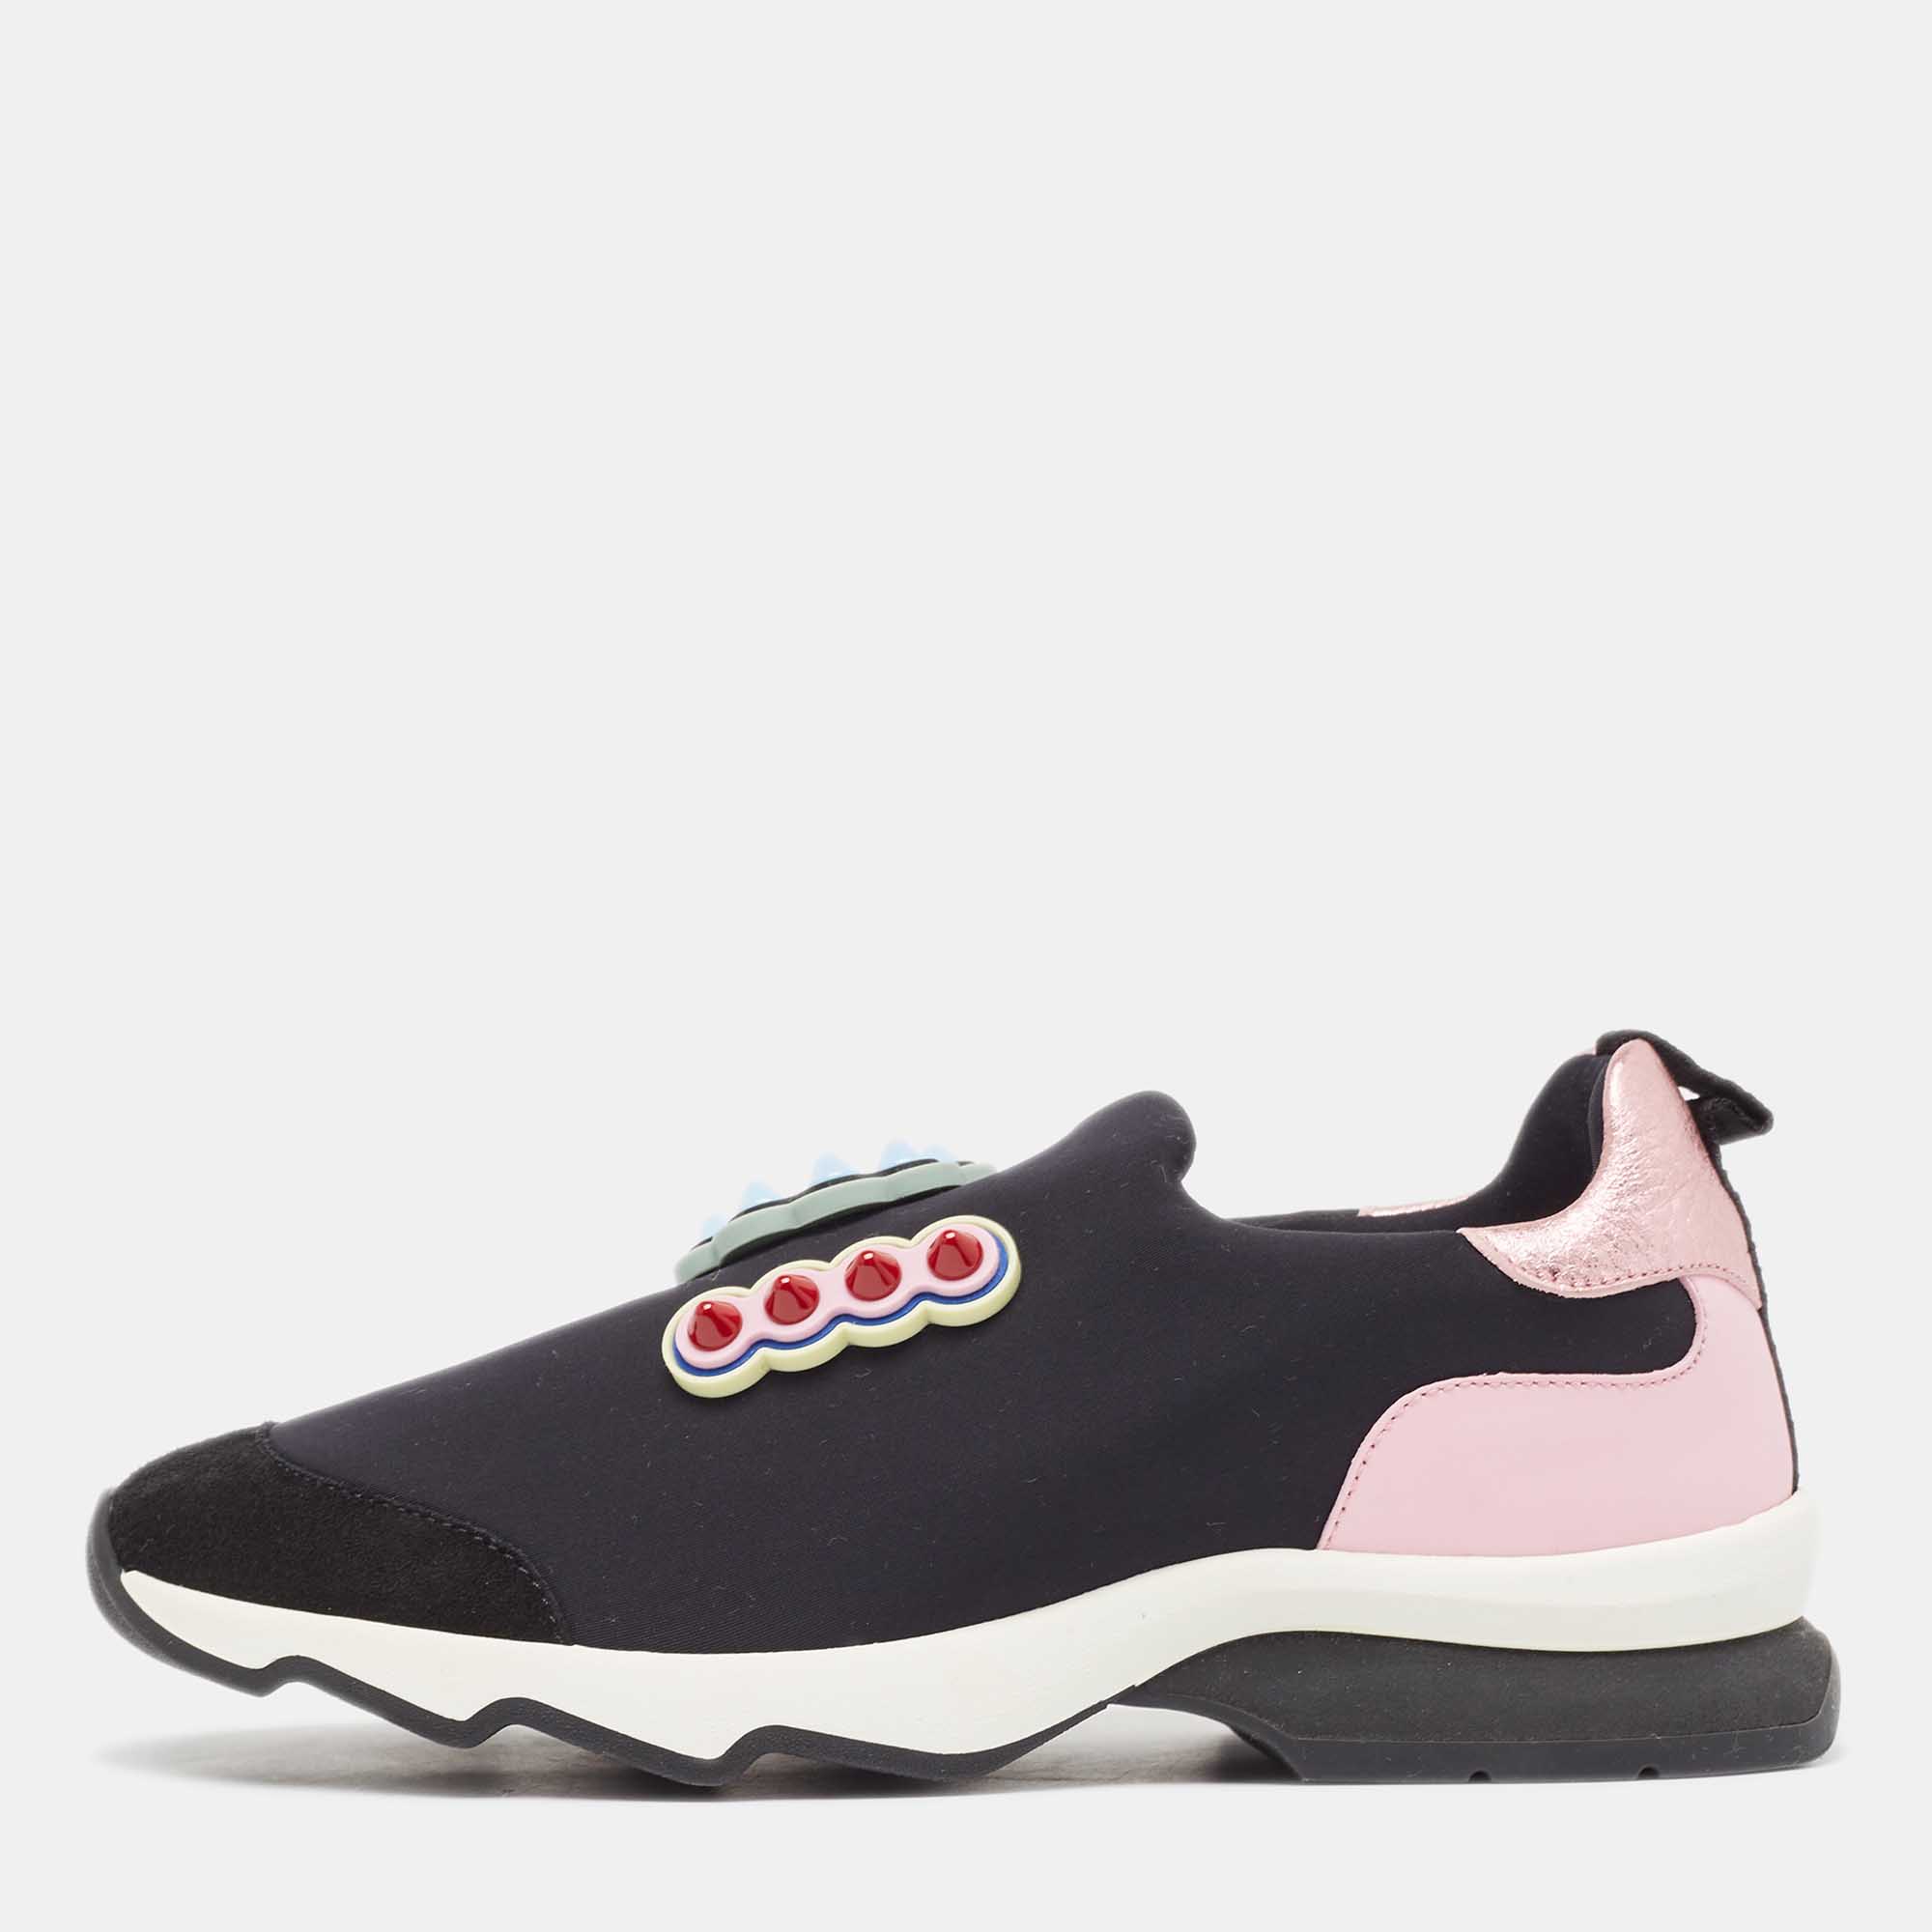 Fendi black/pink fabric and suede fun fair logo slip on sneakers size 36